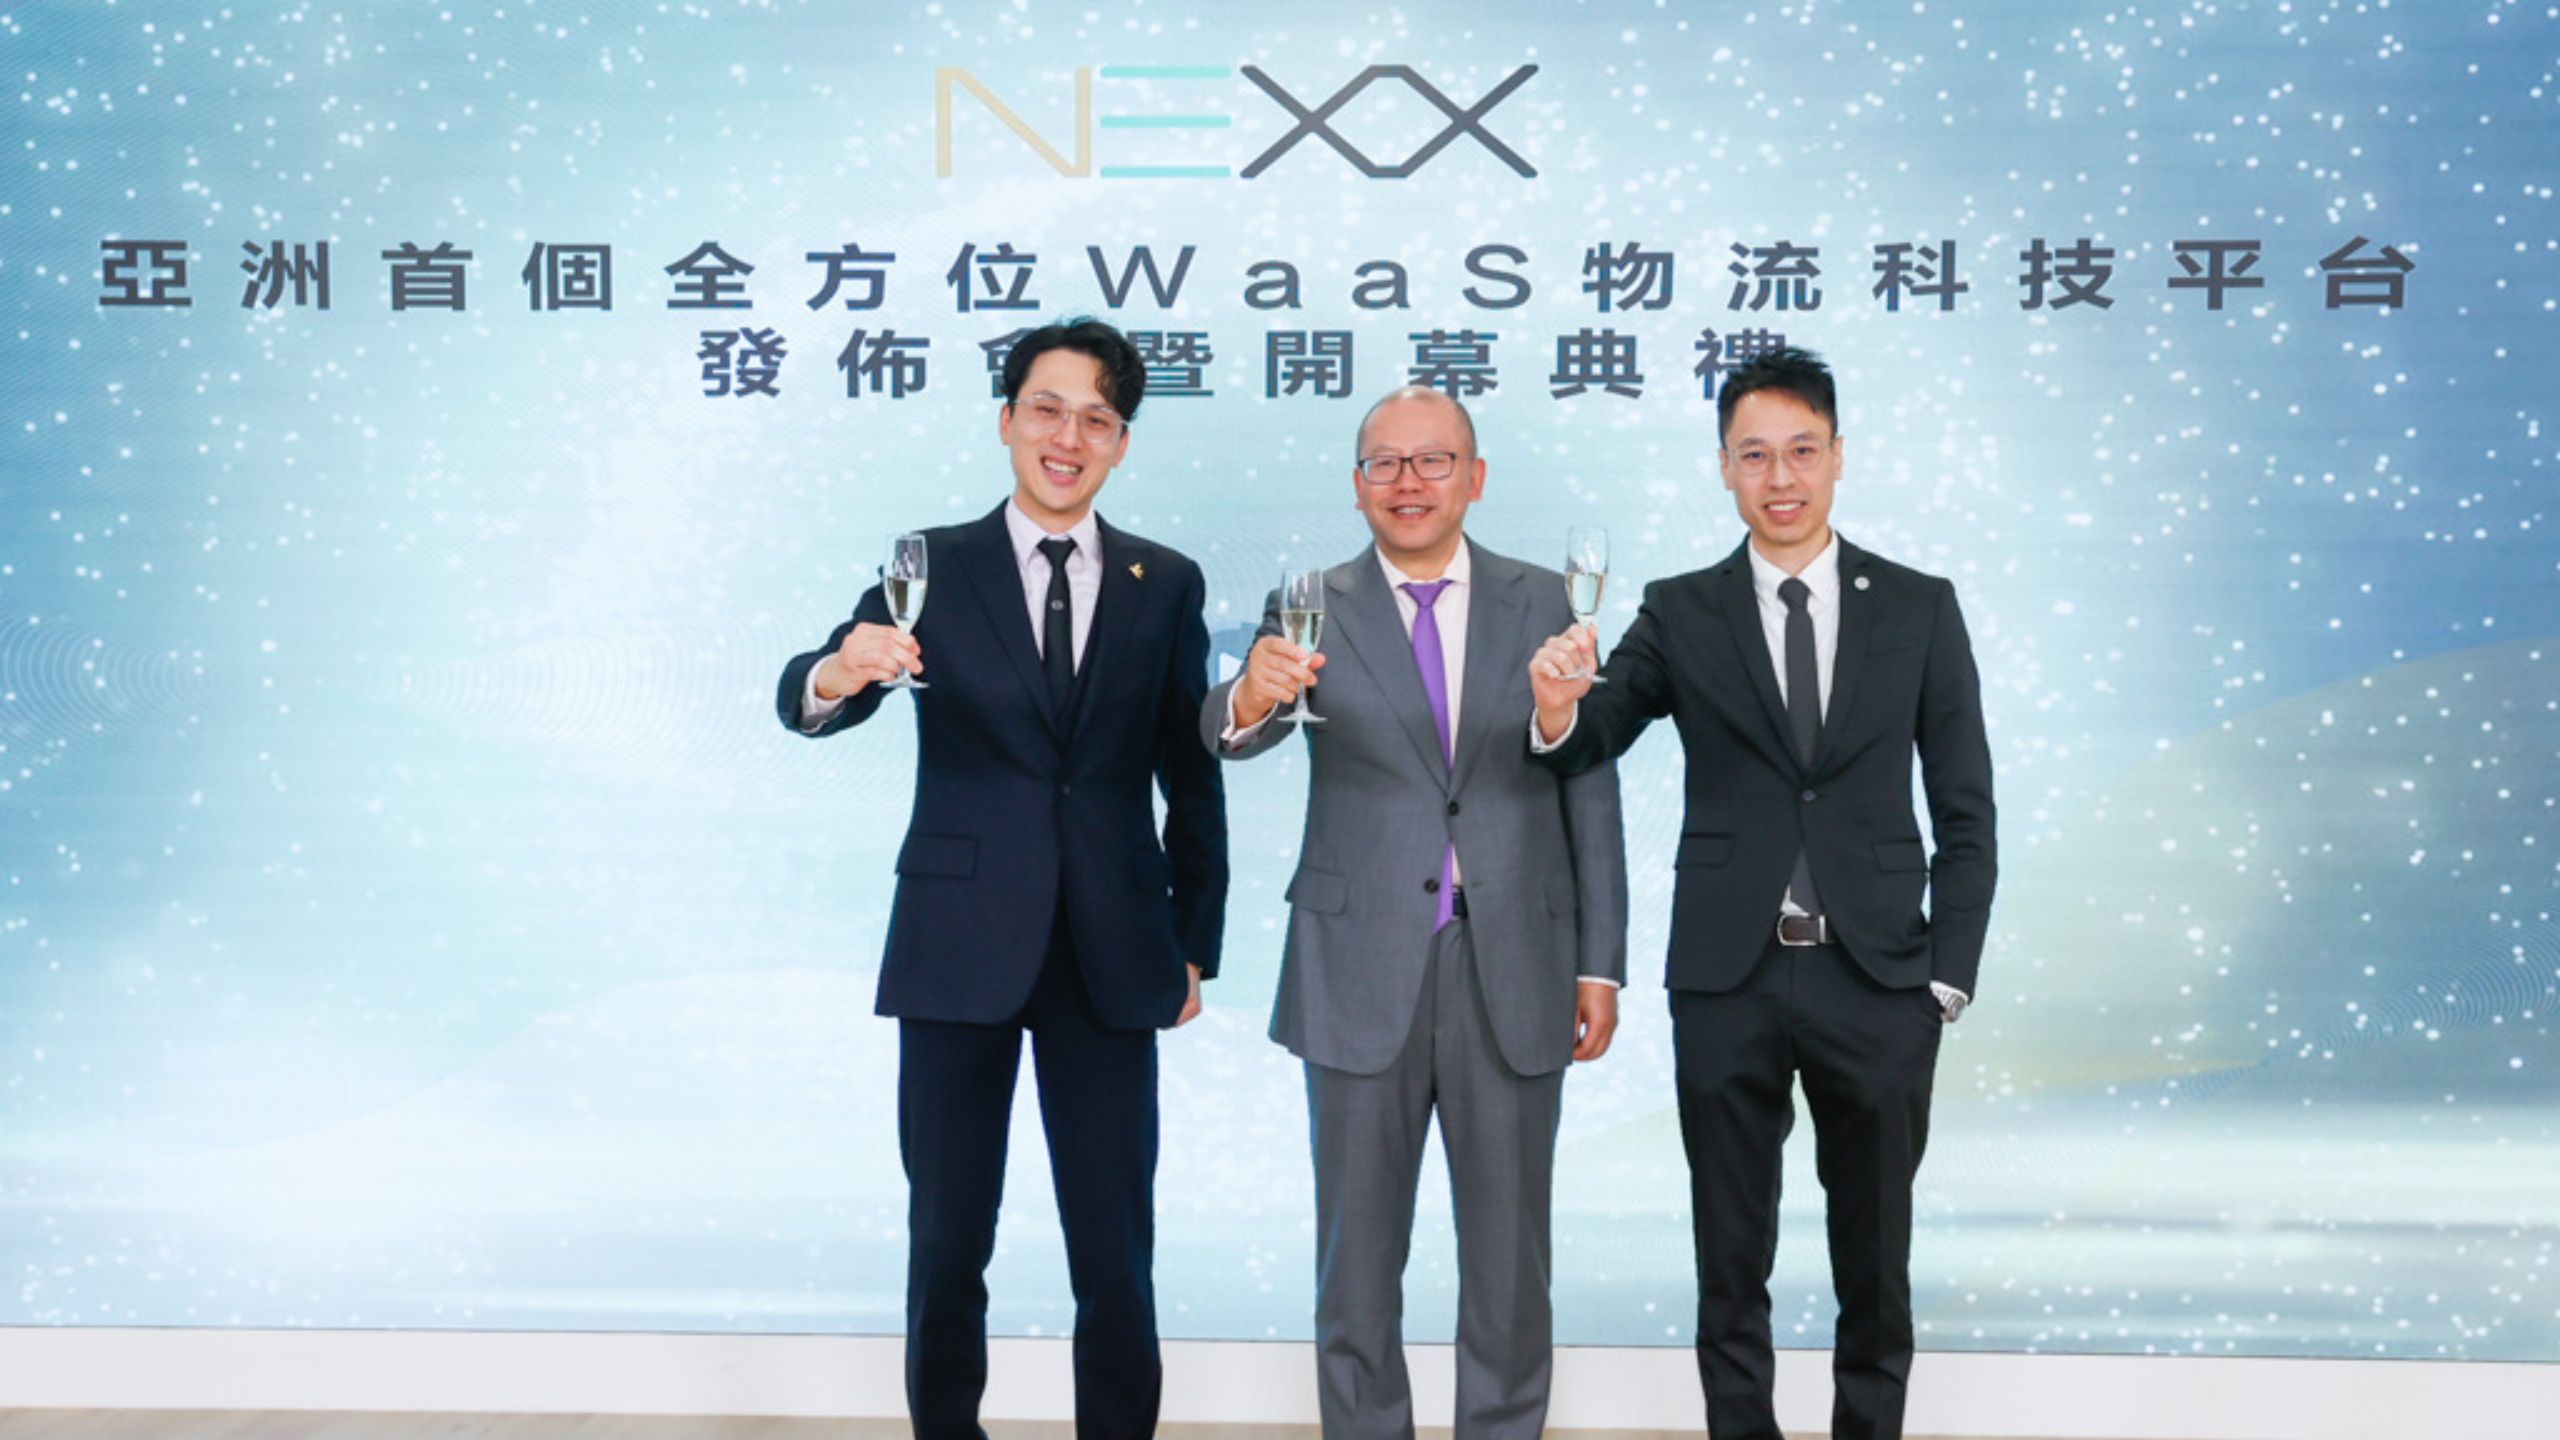 NEXX is jointly established by Mr. Houston Huang, former CEO of J.P. Morgan Securities (China) Co., Ltd. (middle); Mr. John Chan, Chairman and Managing Director of Reitar Logtech Group 